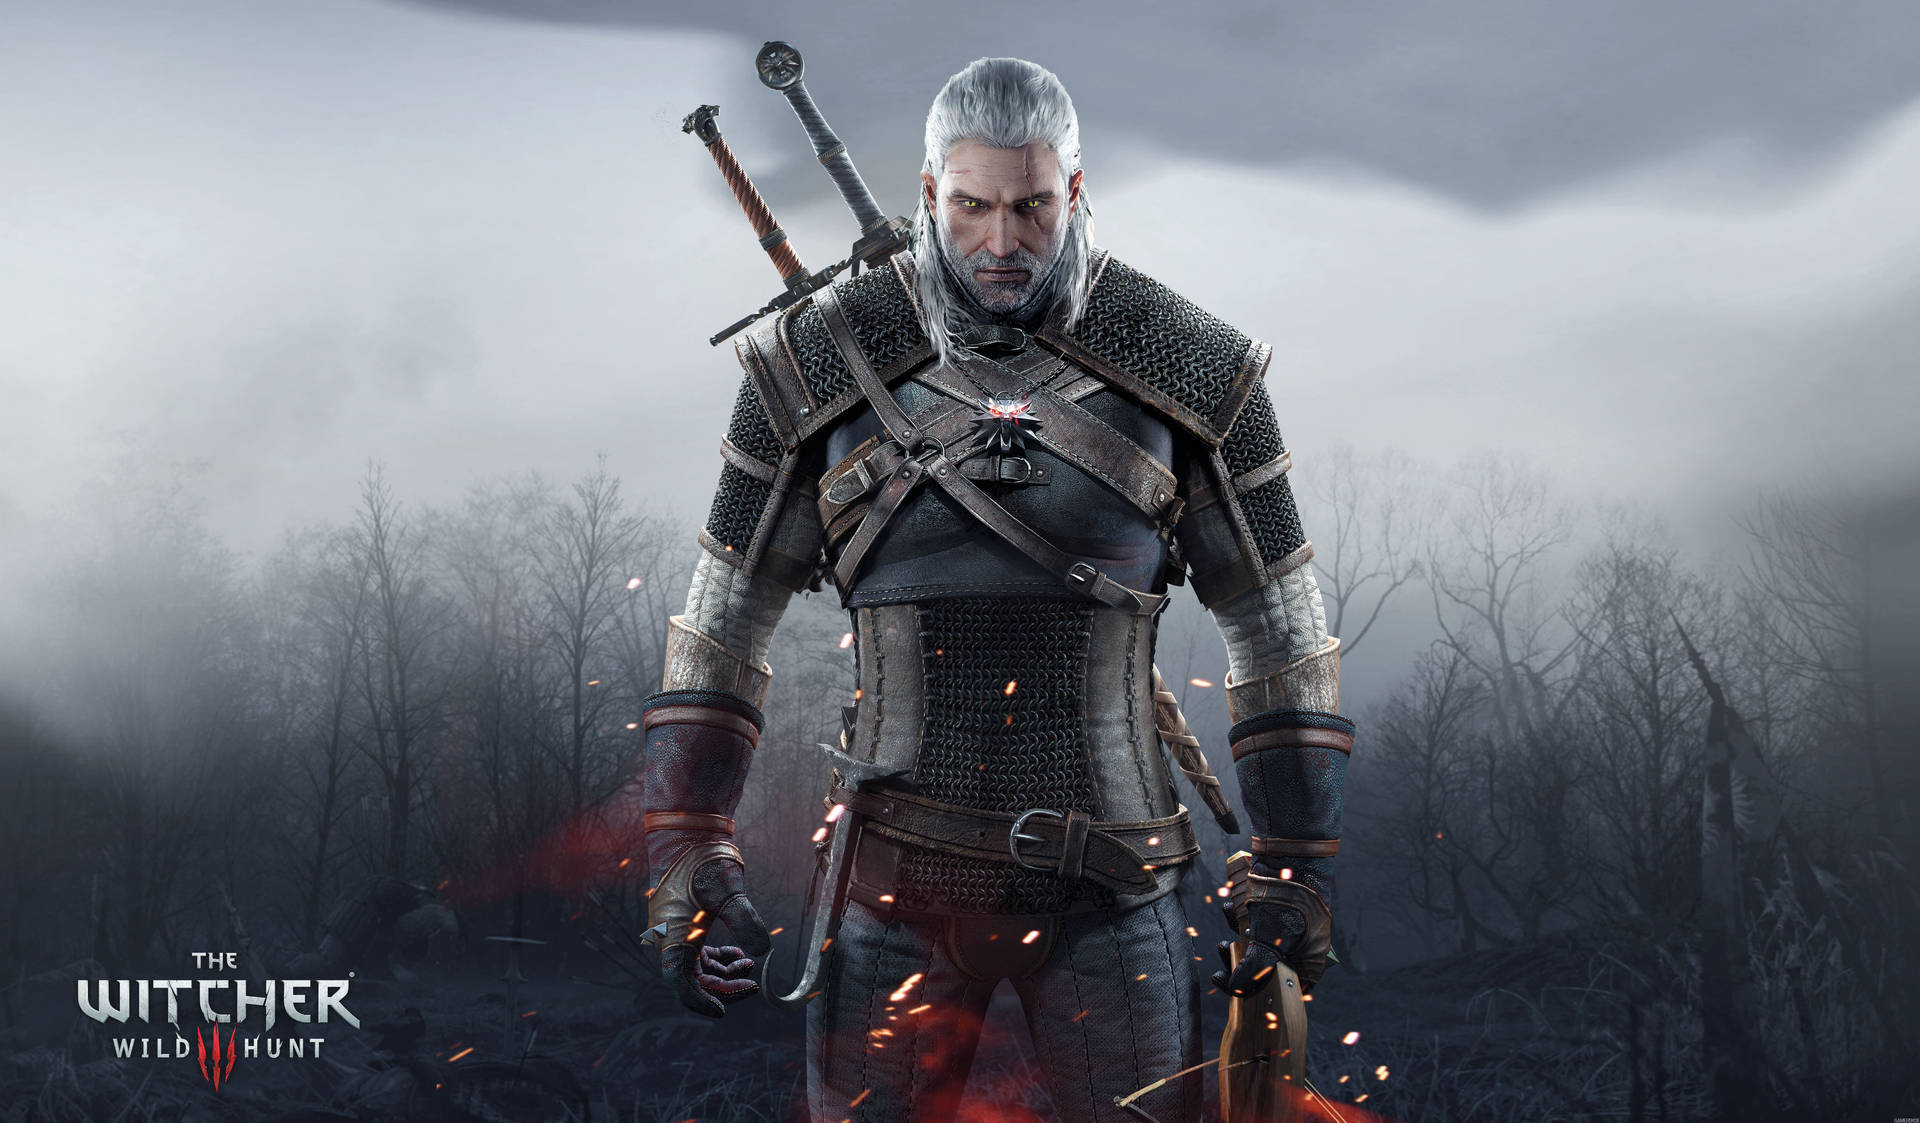 The Witcher 3: Wild Hunt Hd Wallpaper